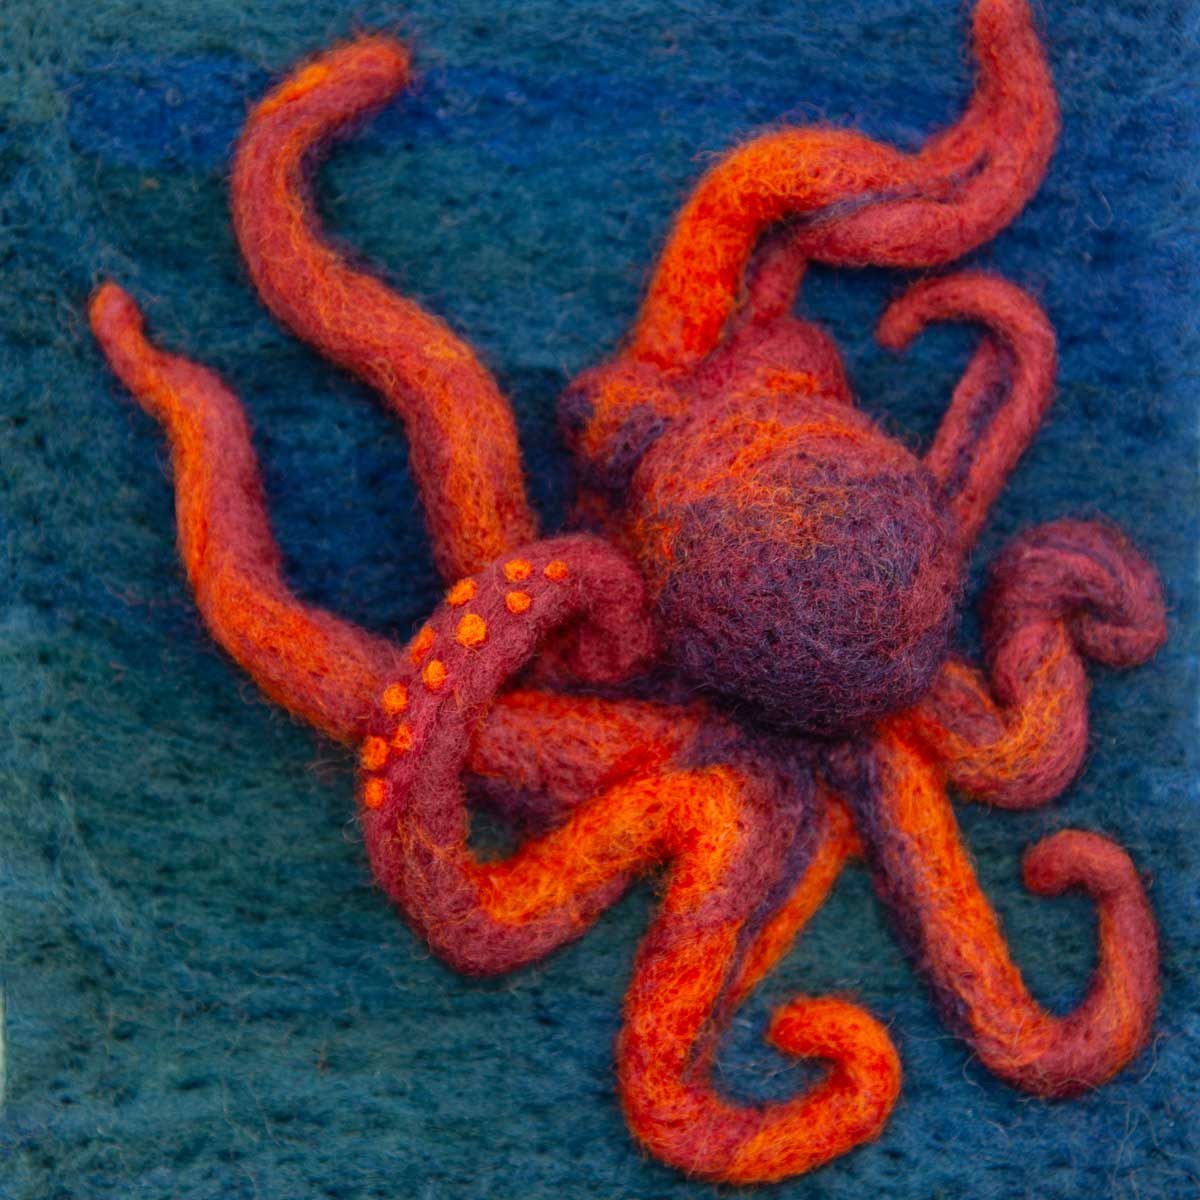 Octopus - Needle Felted Illustration for Hillary Dow's ABC picture book